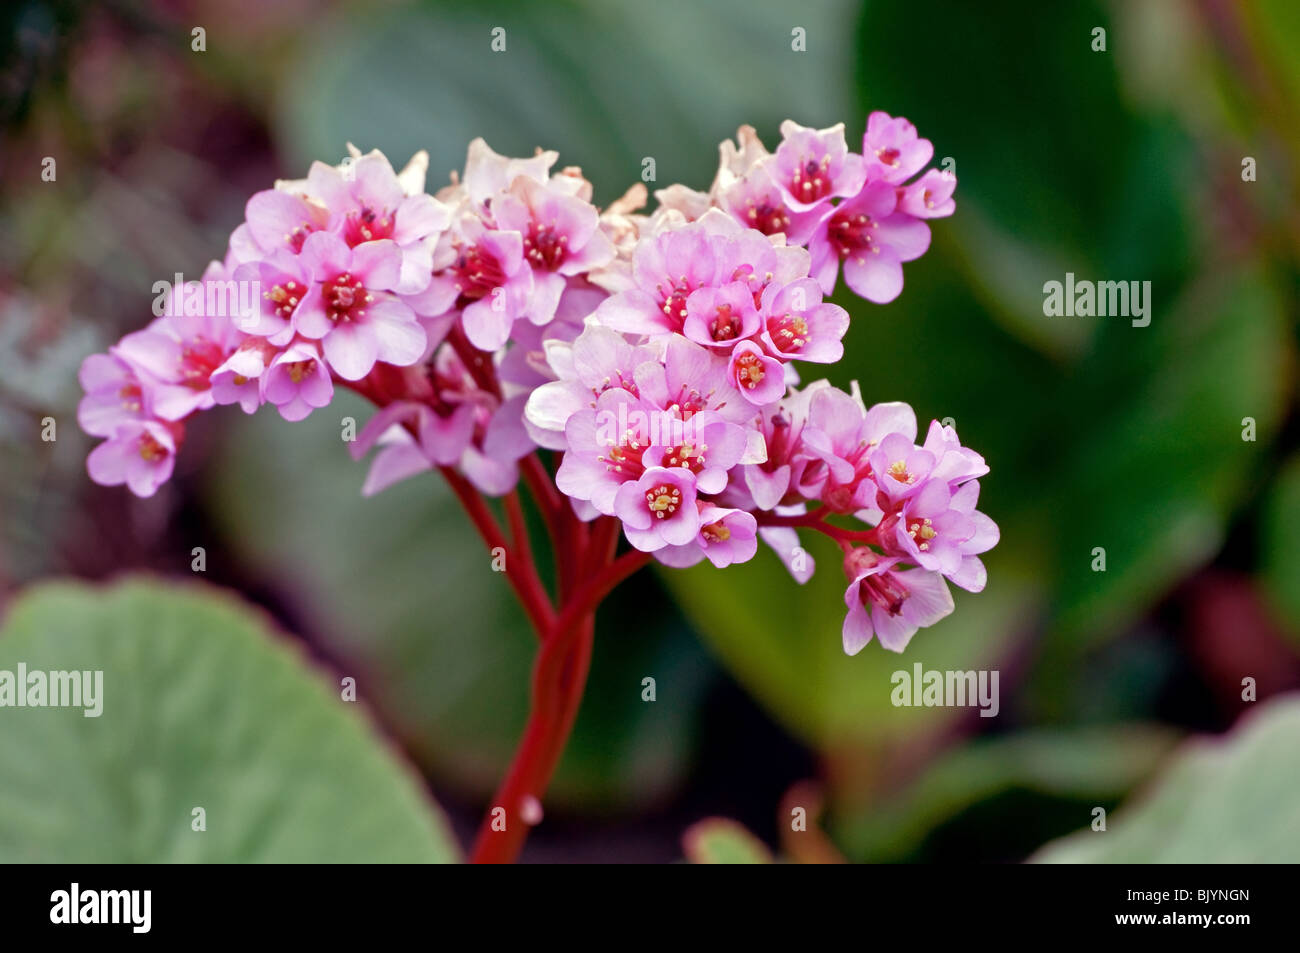 This macro shot of a pink bergenia flower (scientific name is Bergenia cordifolia), common names include Turtle flower. Stock Photo